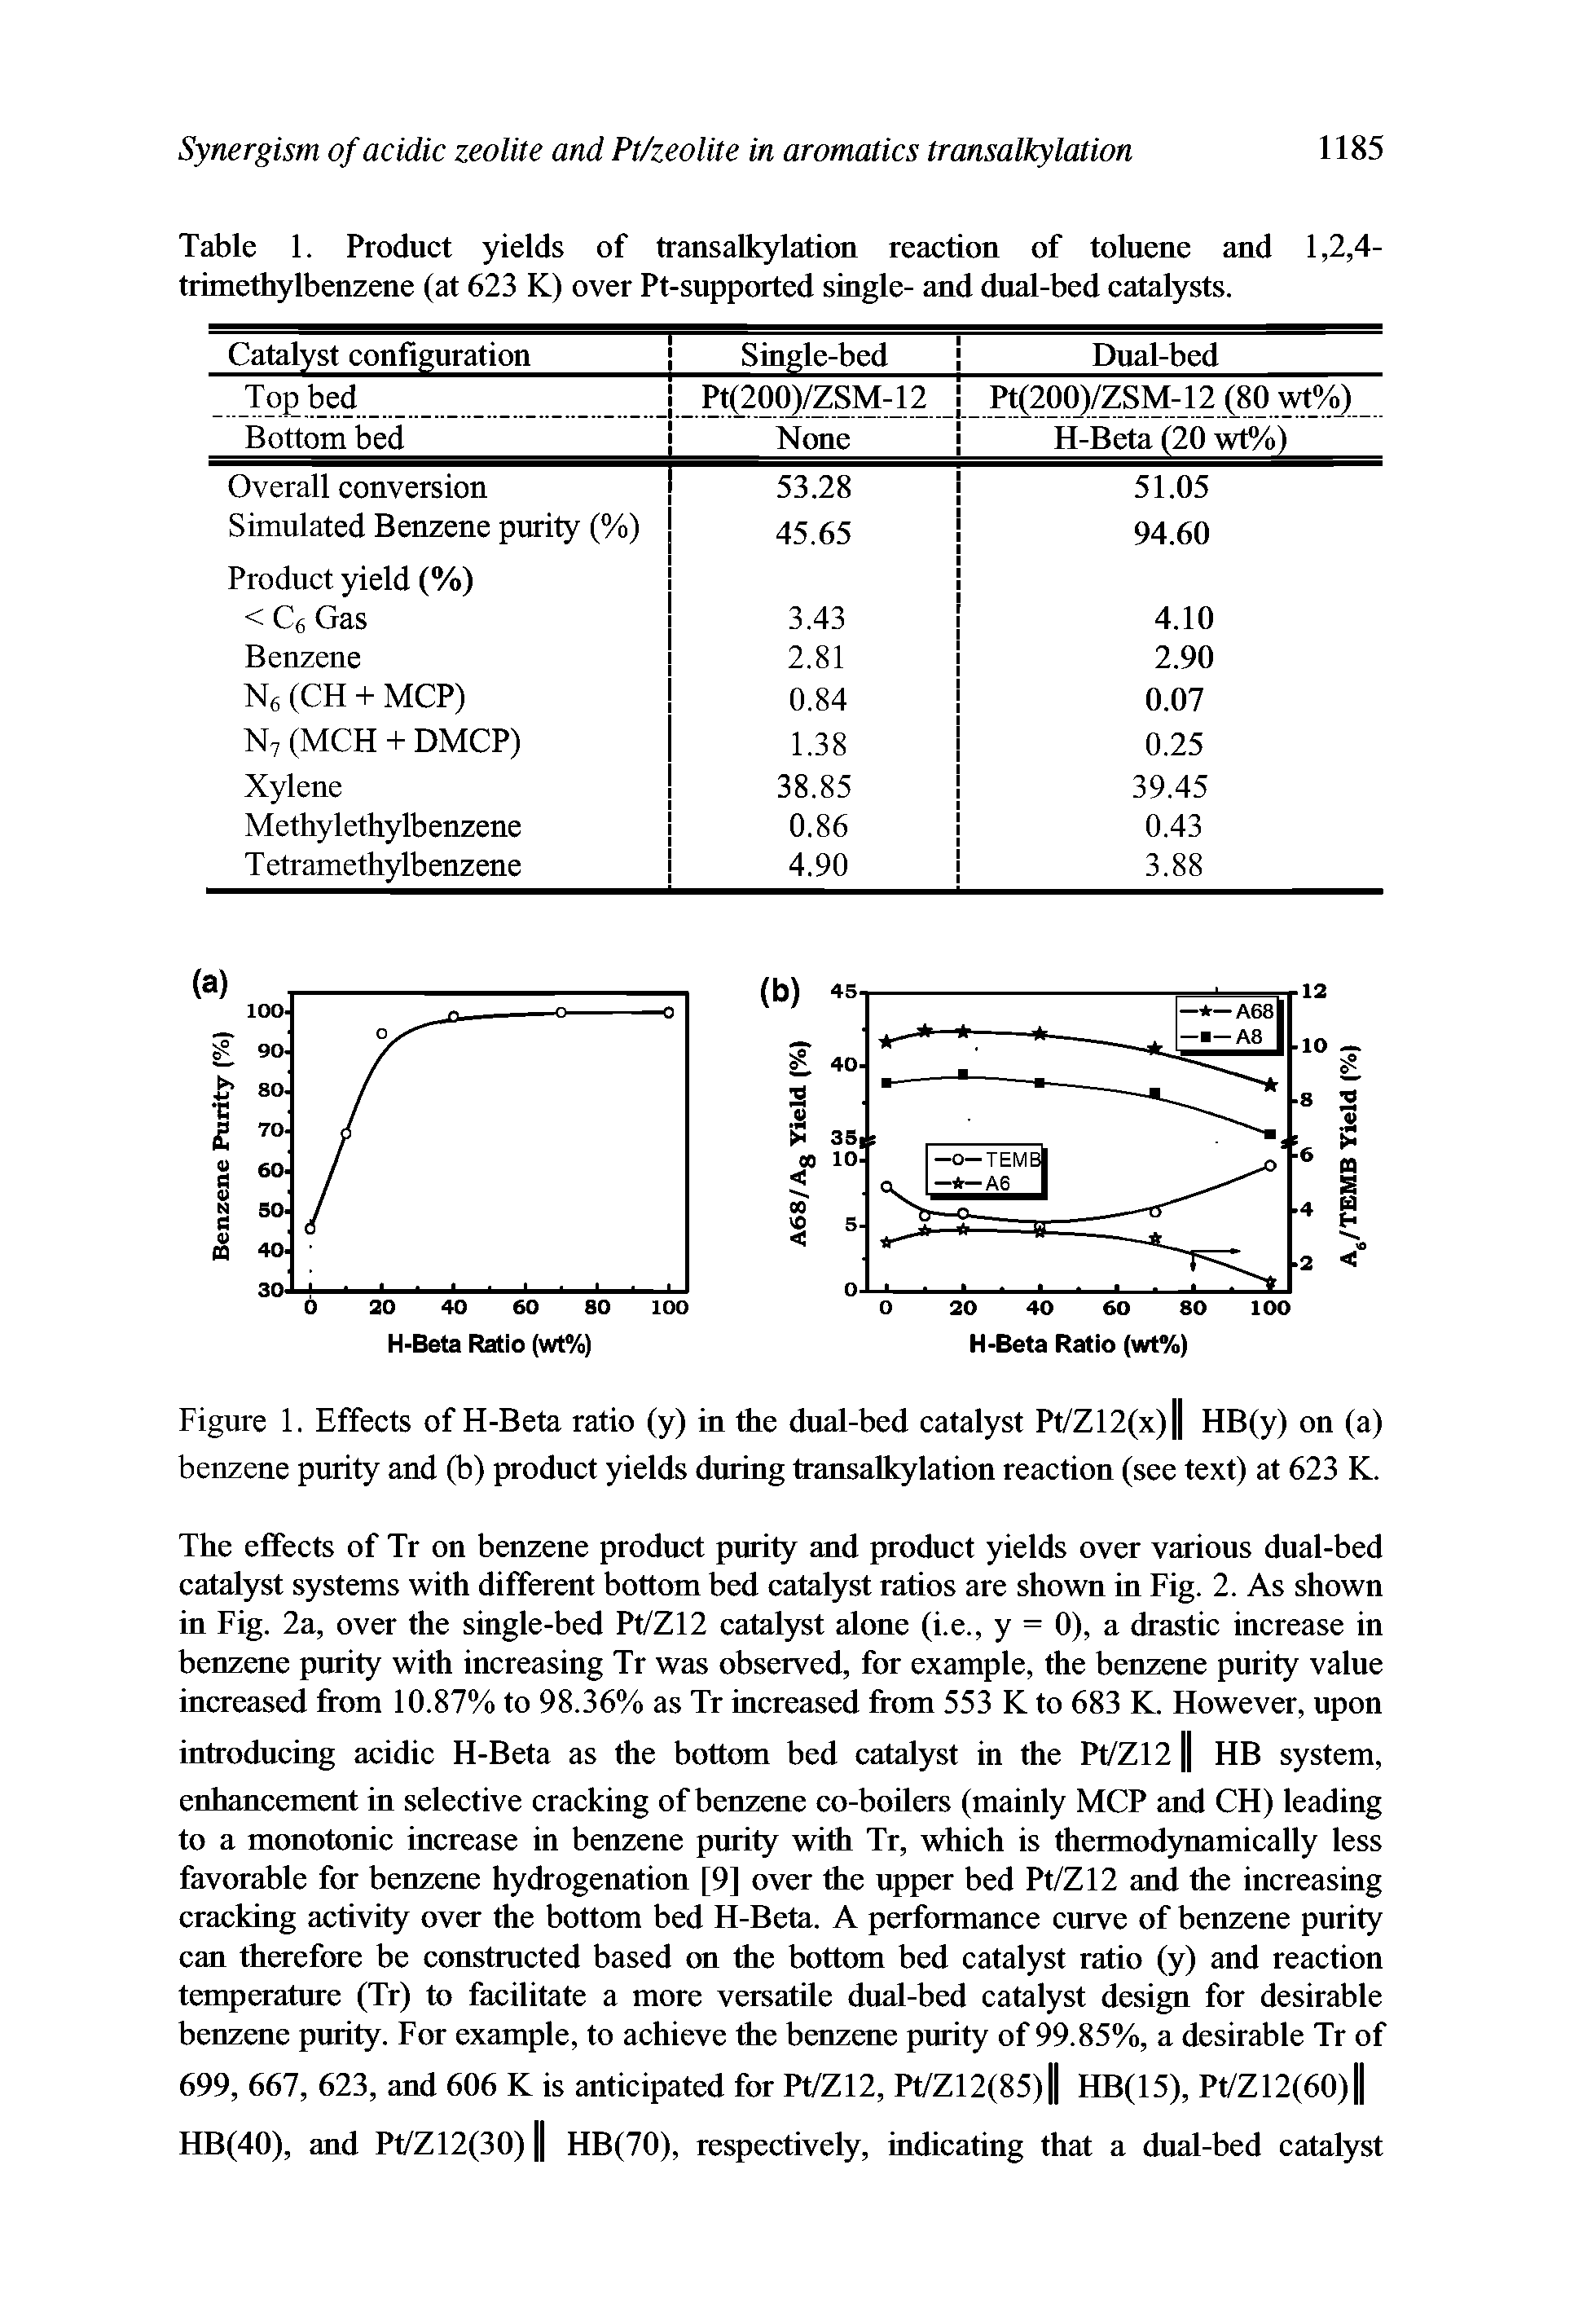 Figure 1. Effects of H-Beta ratio (y) in the dual-bed catalyst Pt/Z12(x) HB(y) on (a) benzene purity and (b) product yields during transalkylation reaction (see text) at 623 K.